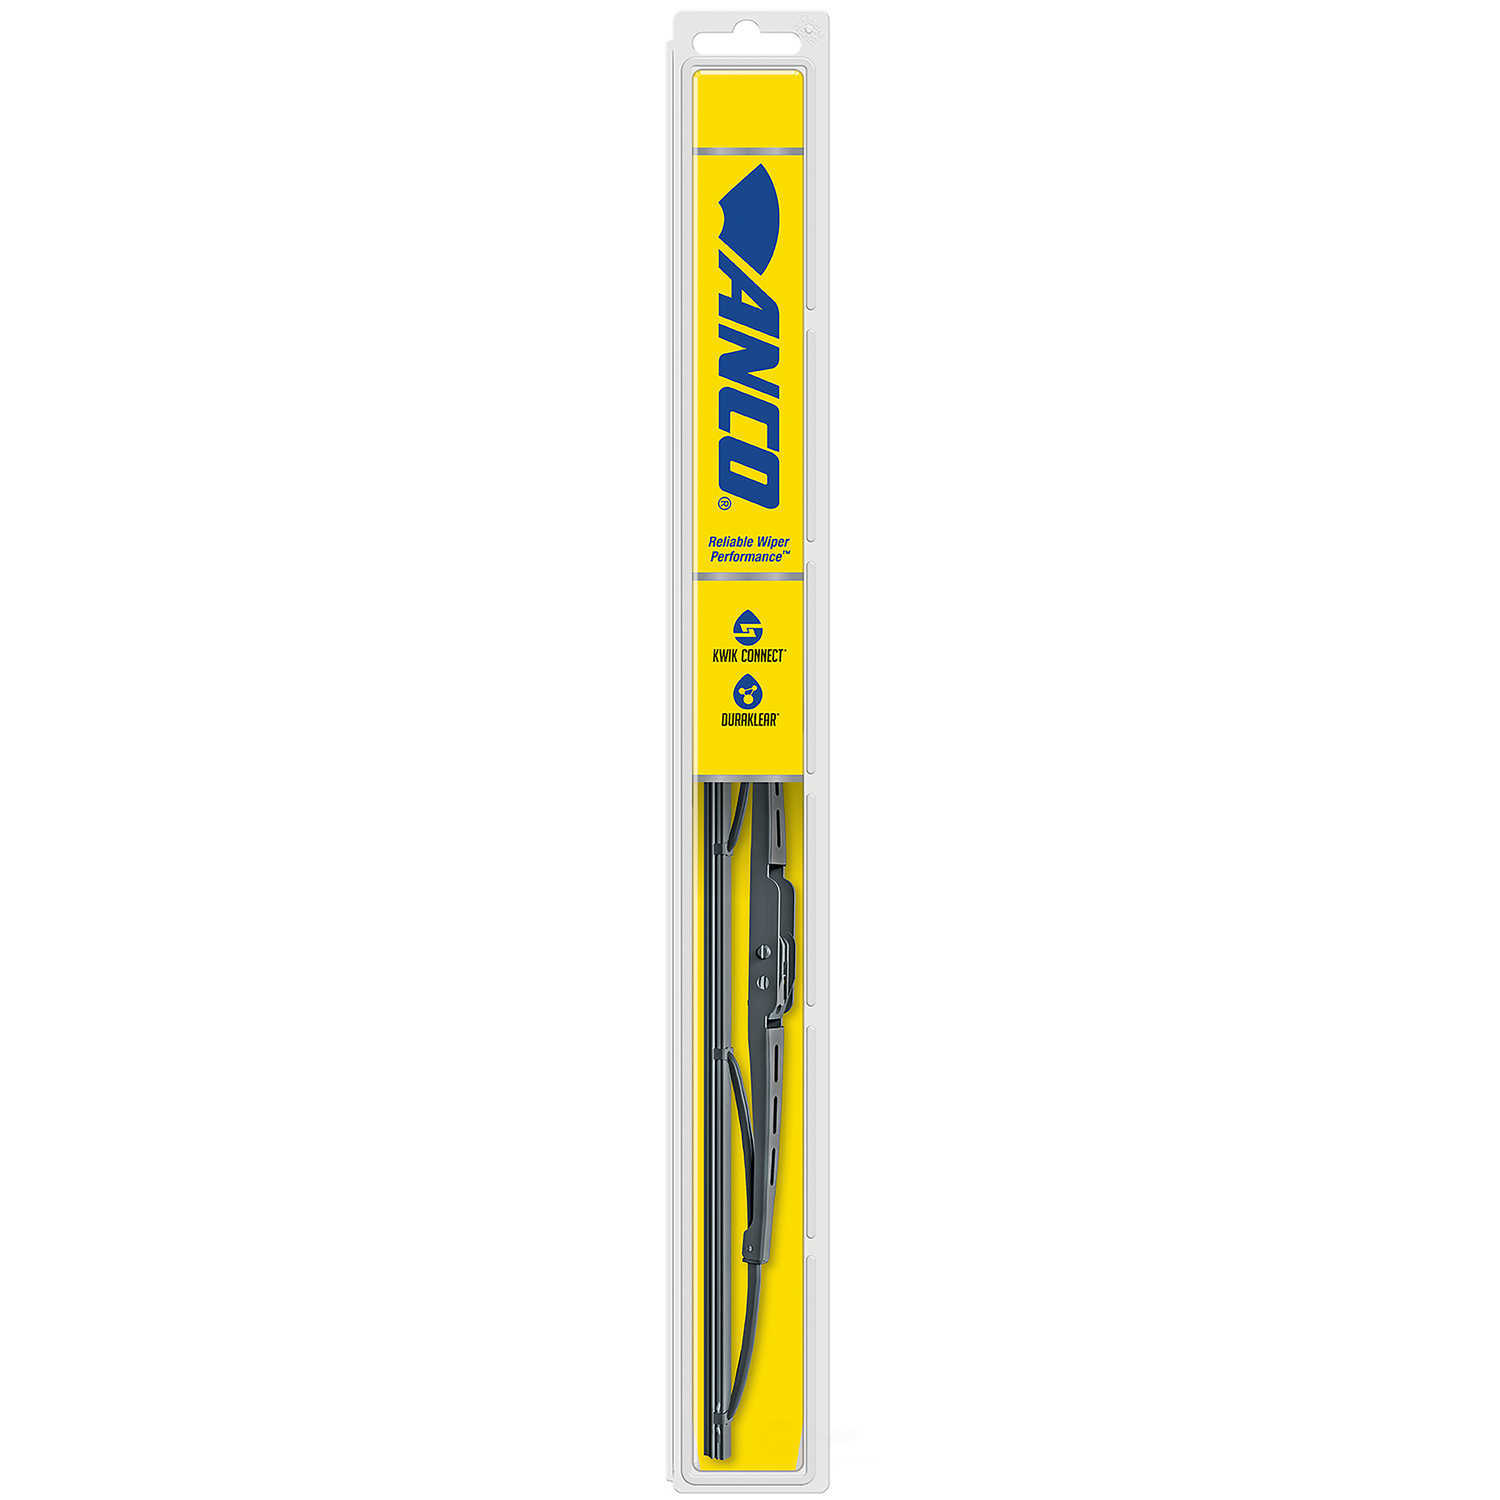 ANCO WIPER PRODUCTS - ANCO 31-Series Wiper Blade (Front Left) - ANC 31-22